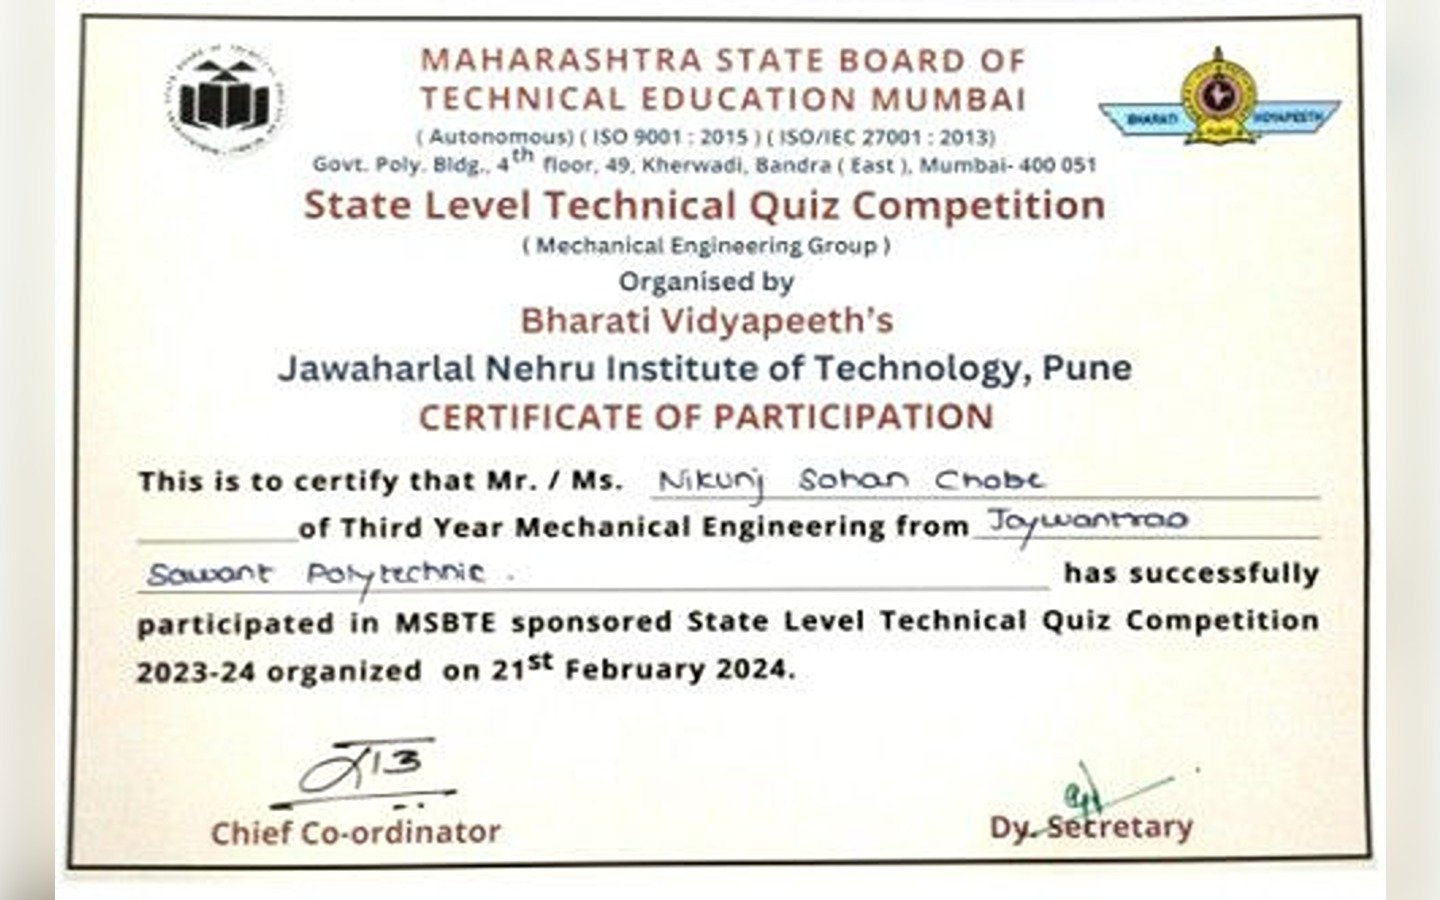 MSBTE Sponsored State Level Technical Quiz Competition 2024